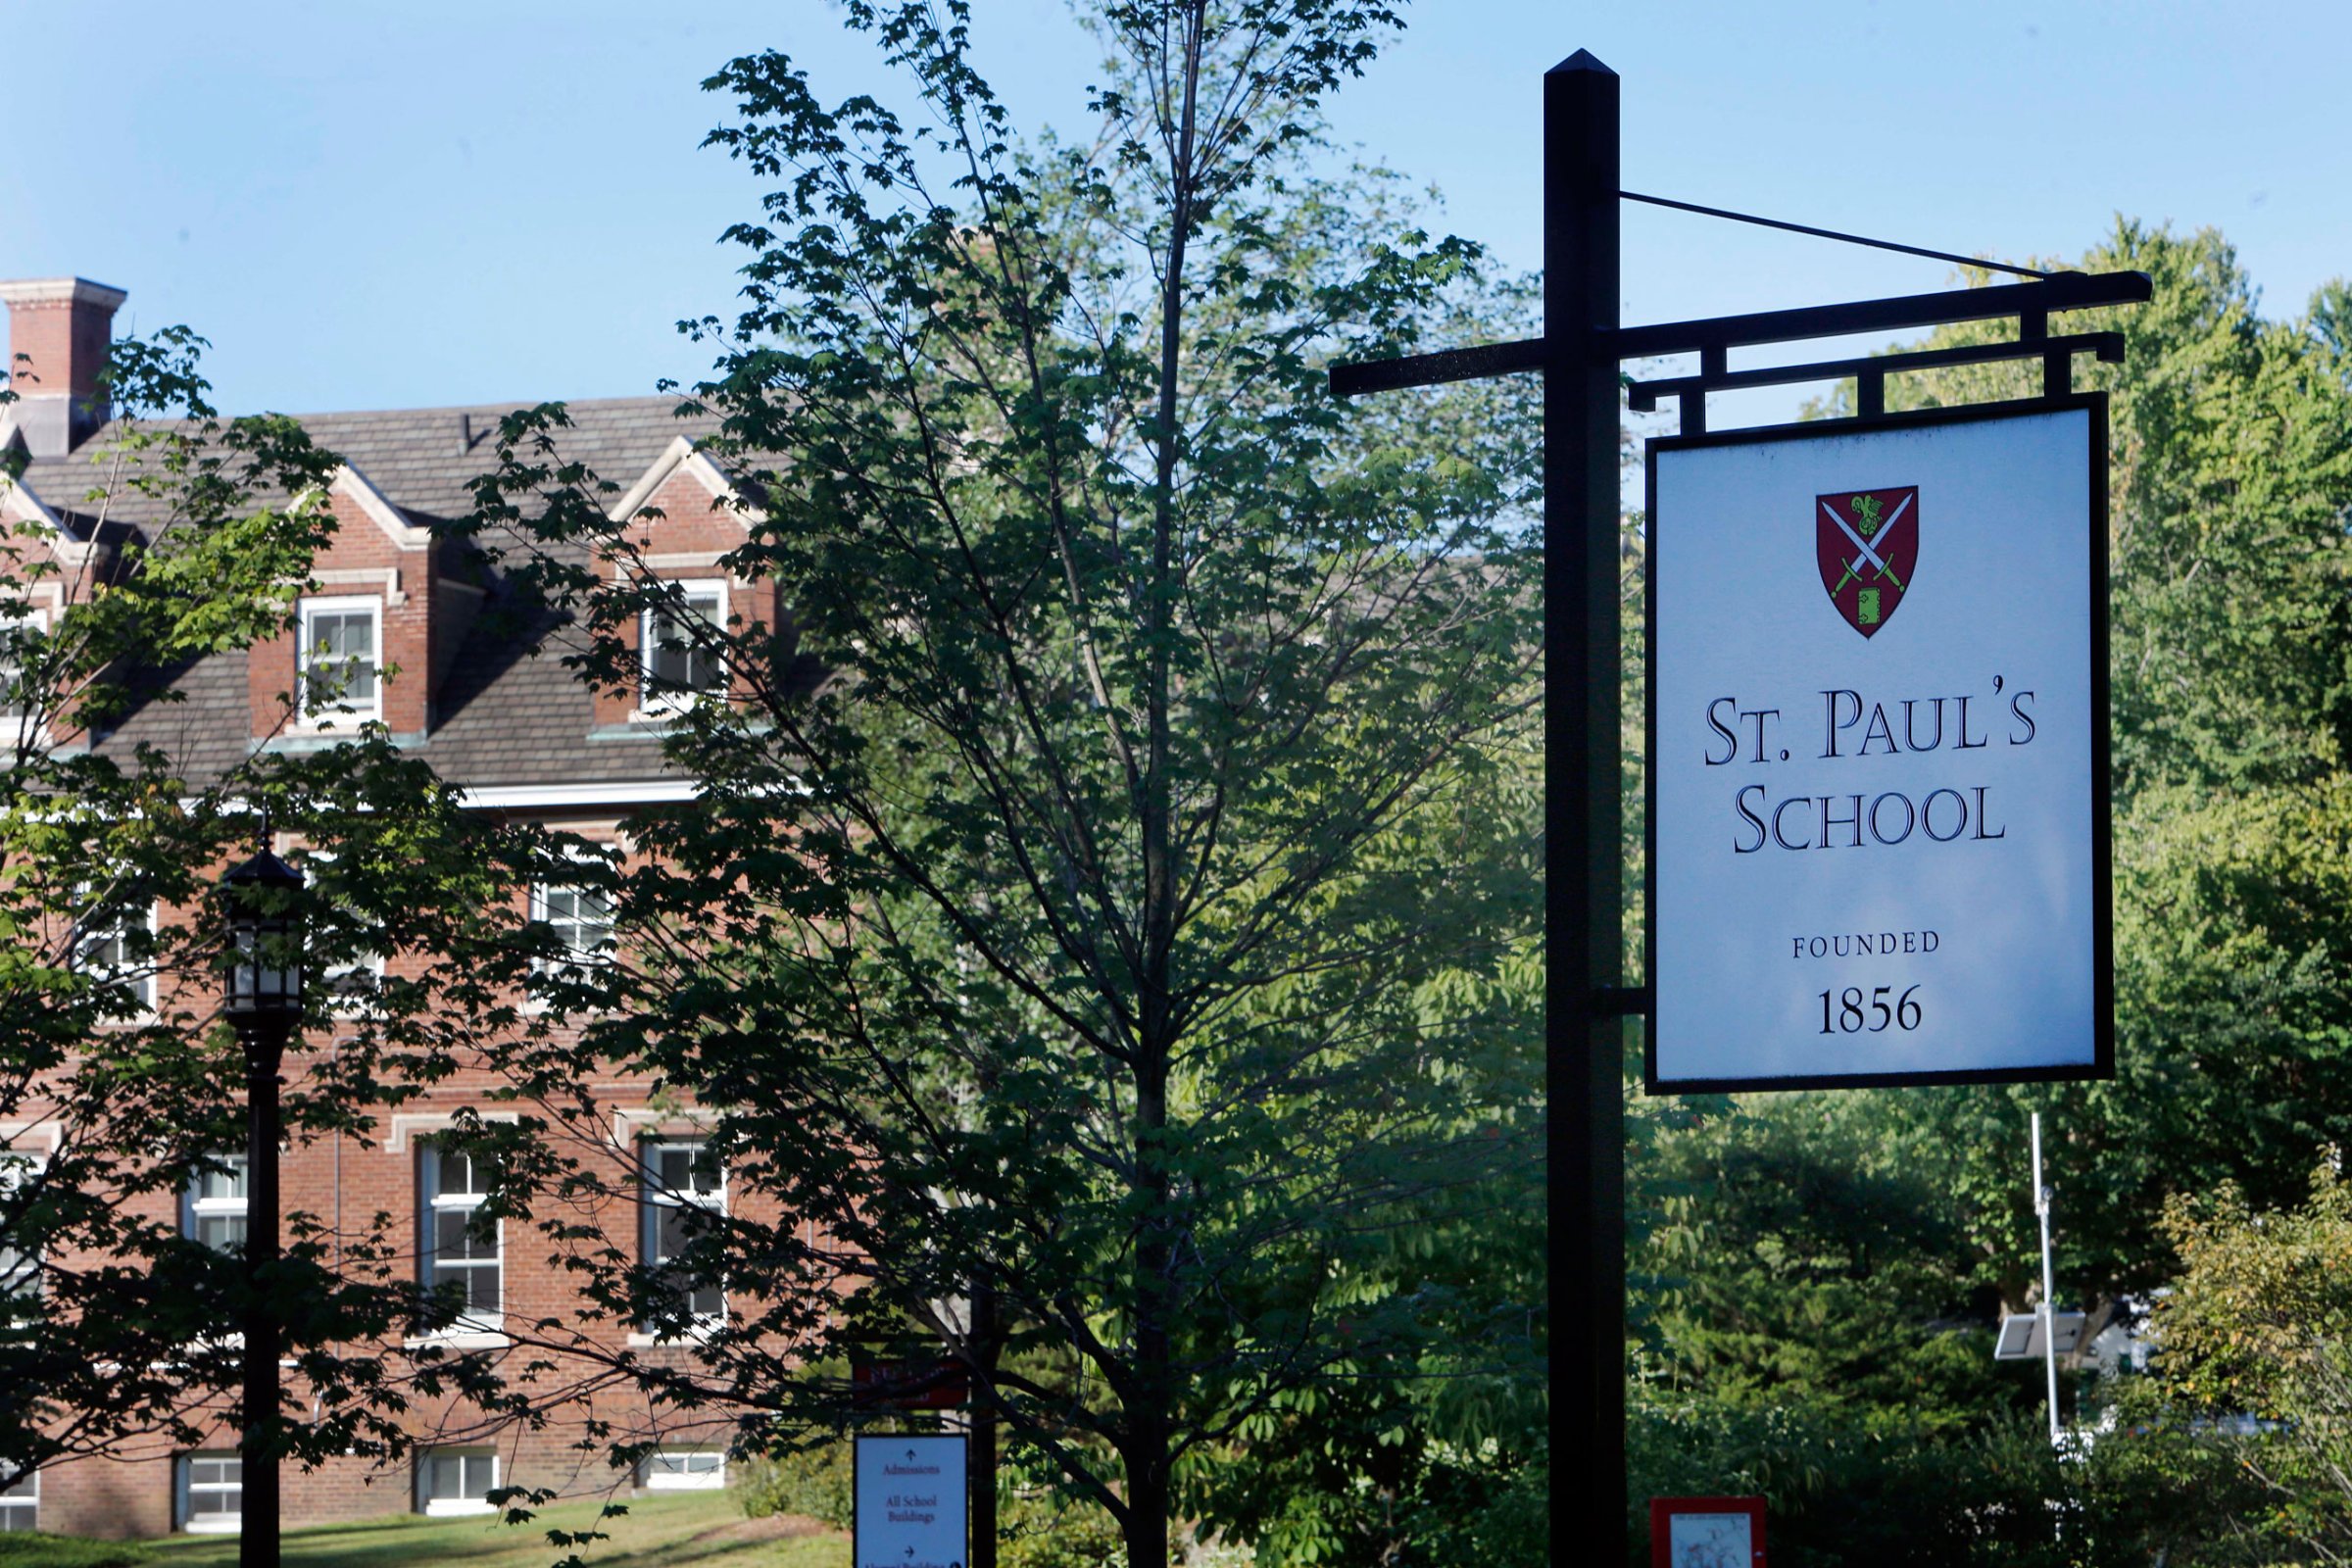 The entrance to the elite St. Paul’s School is seen Friday Aug. 14, 2015 in Concord, N.H., Monday, Aug. 17, 2015, Owen Labrie, a former student, goes on trial Monday, Aug. 17, 2015, for taking part in a practice at the school known as “Senior Salute” where graduating boys try to take the virginity of younger girls before the school year ends. (AP Photo/Jim Cole)